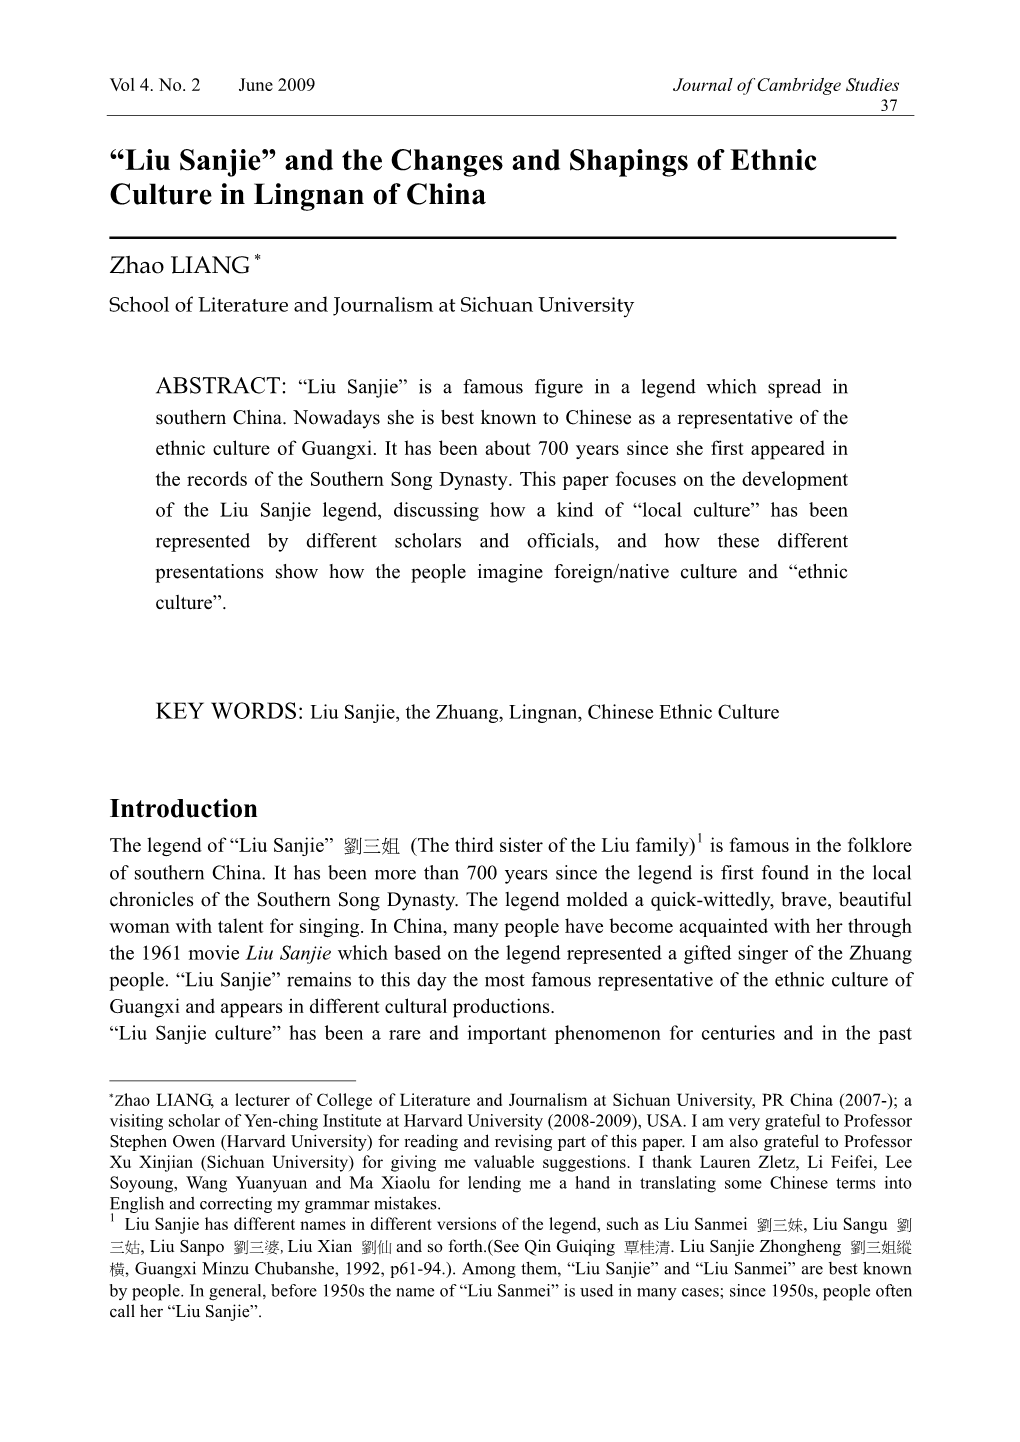 Liu Sanjie” and the Changes and Shapings of Ethnic Culture in Lingnan of China